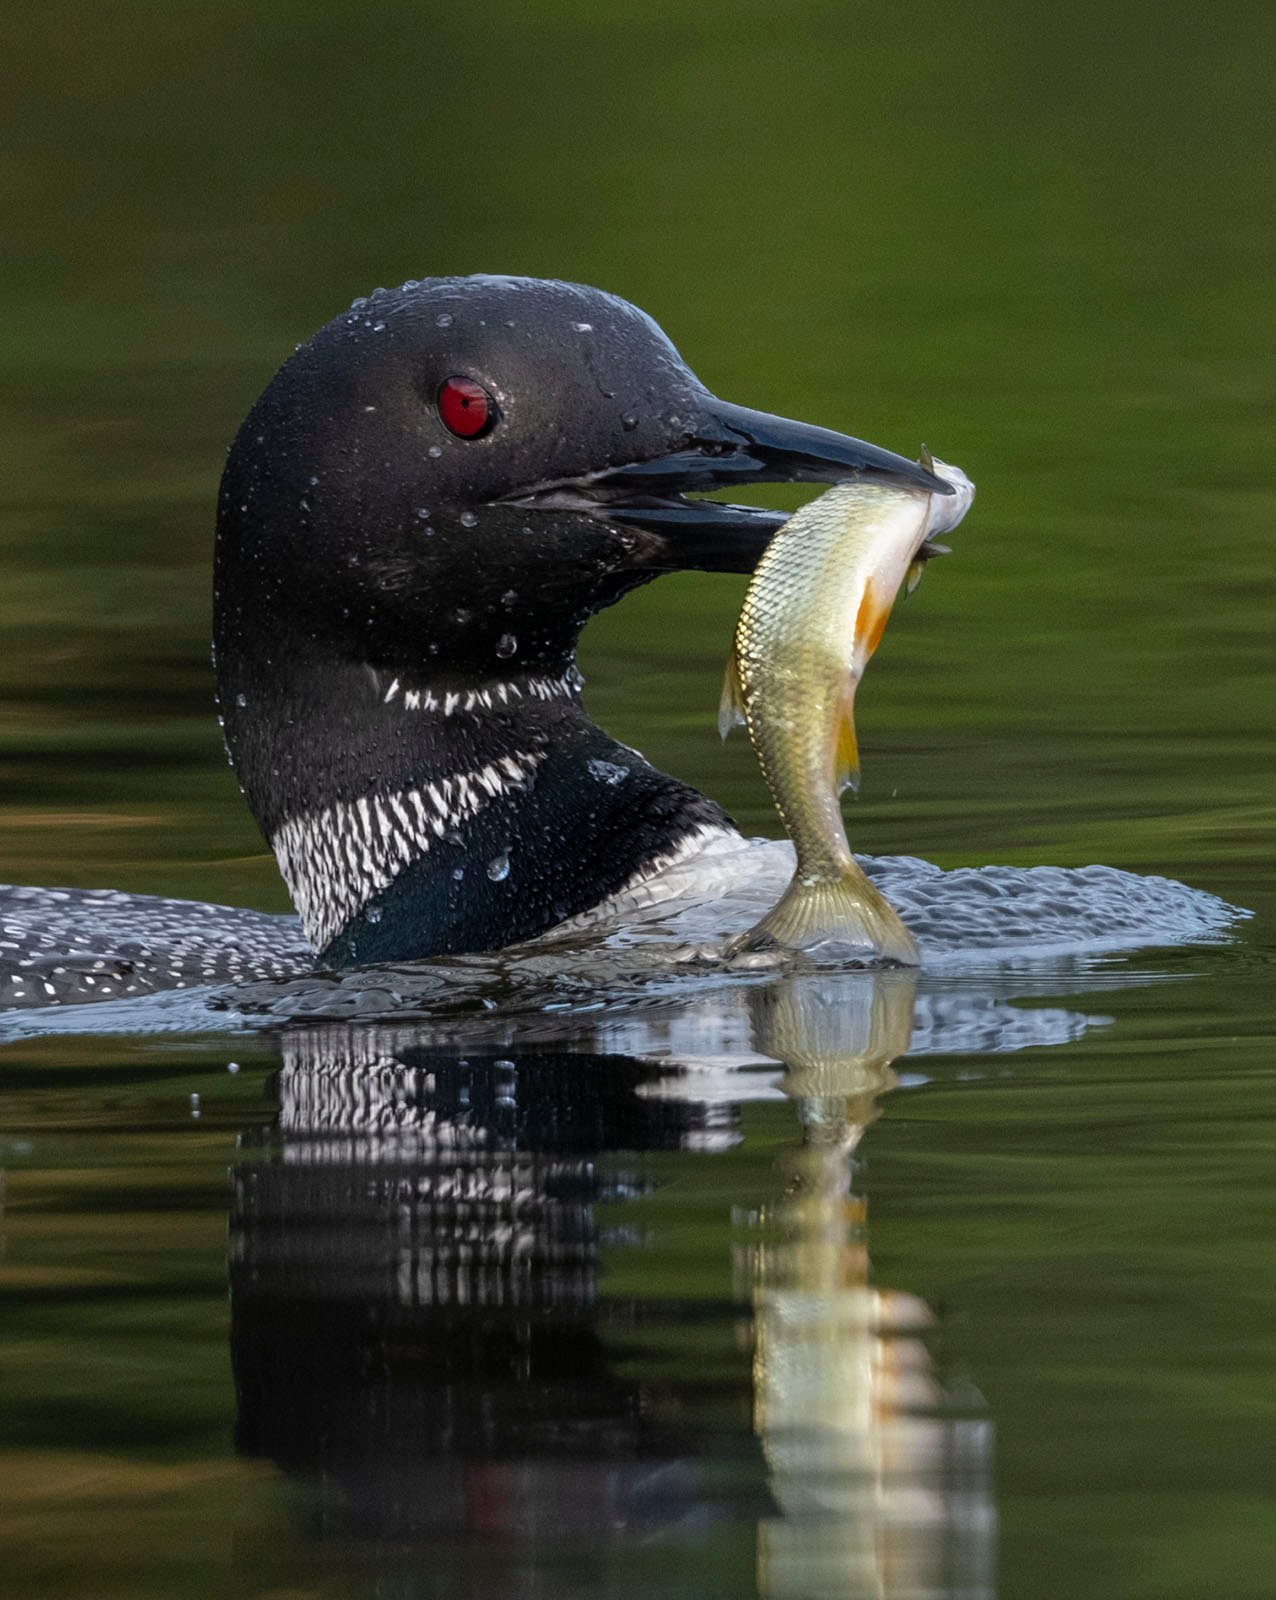 A common loon with striking red eyes, floating on calm water, clutching a fish in its beak. its black and white speckled feathers shimmer in soft light.